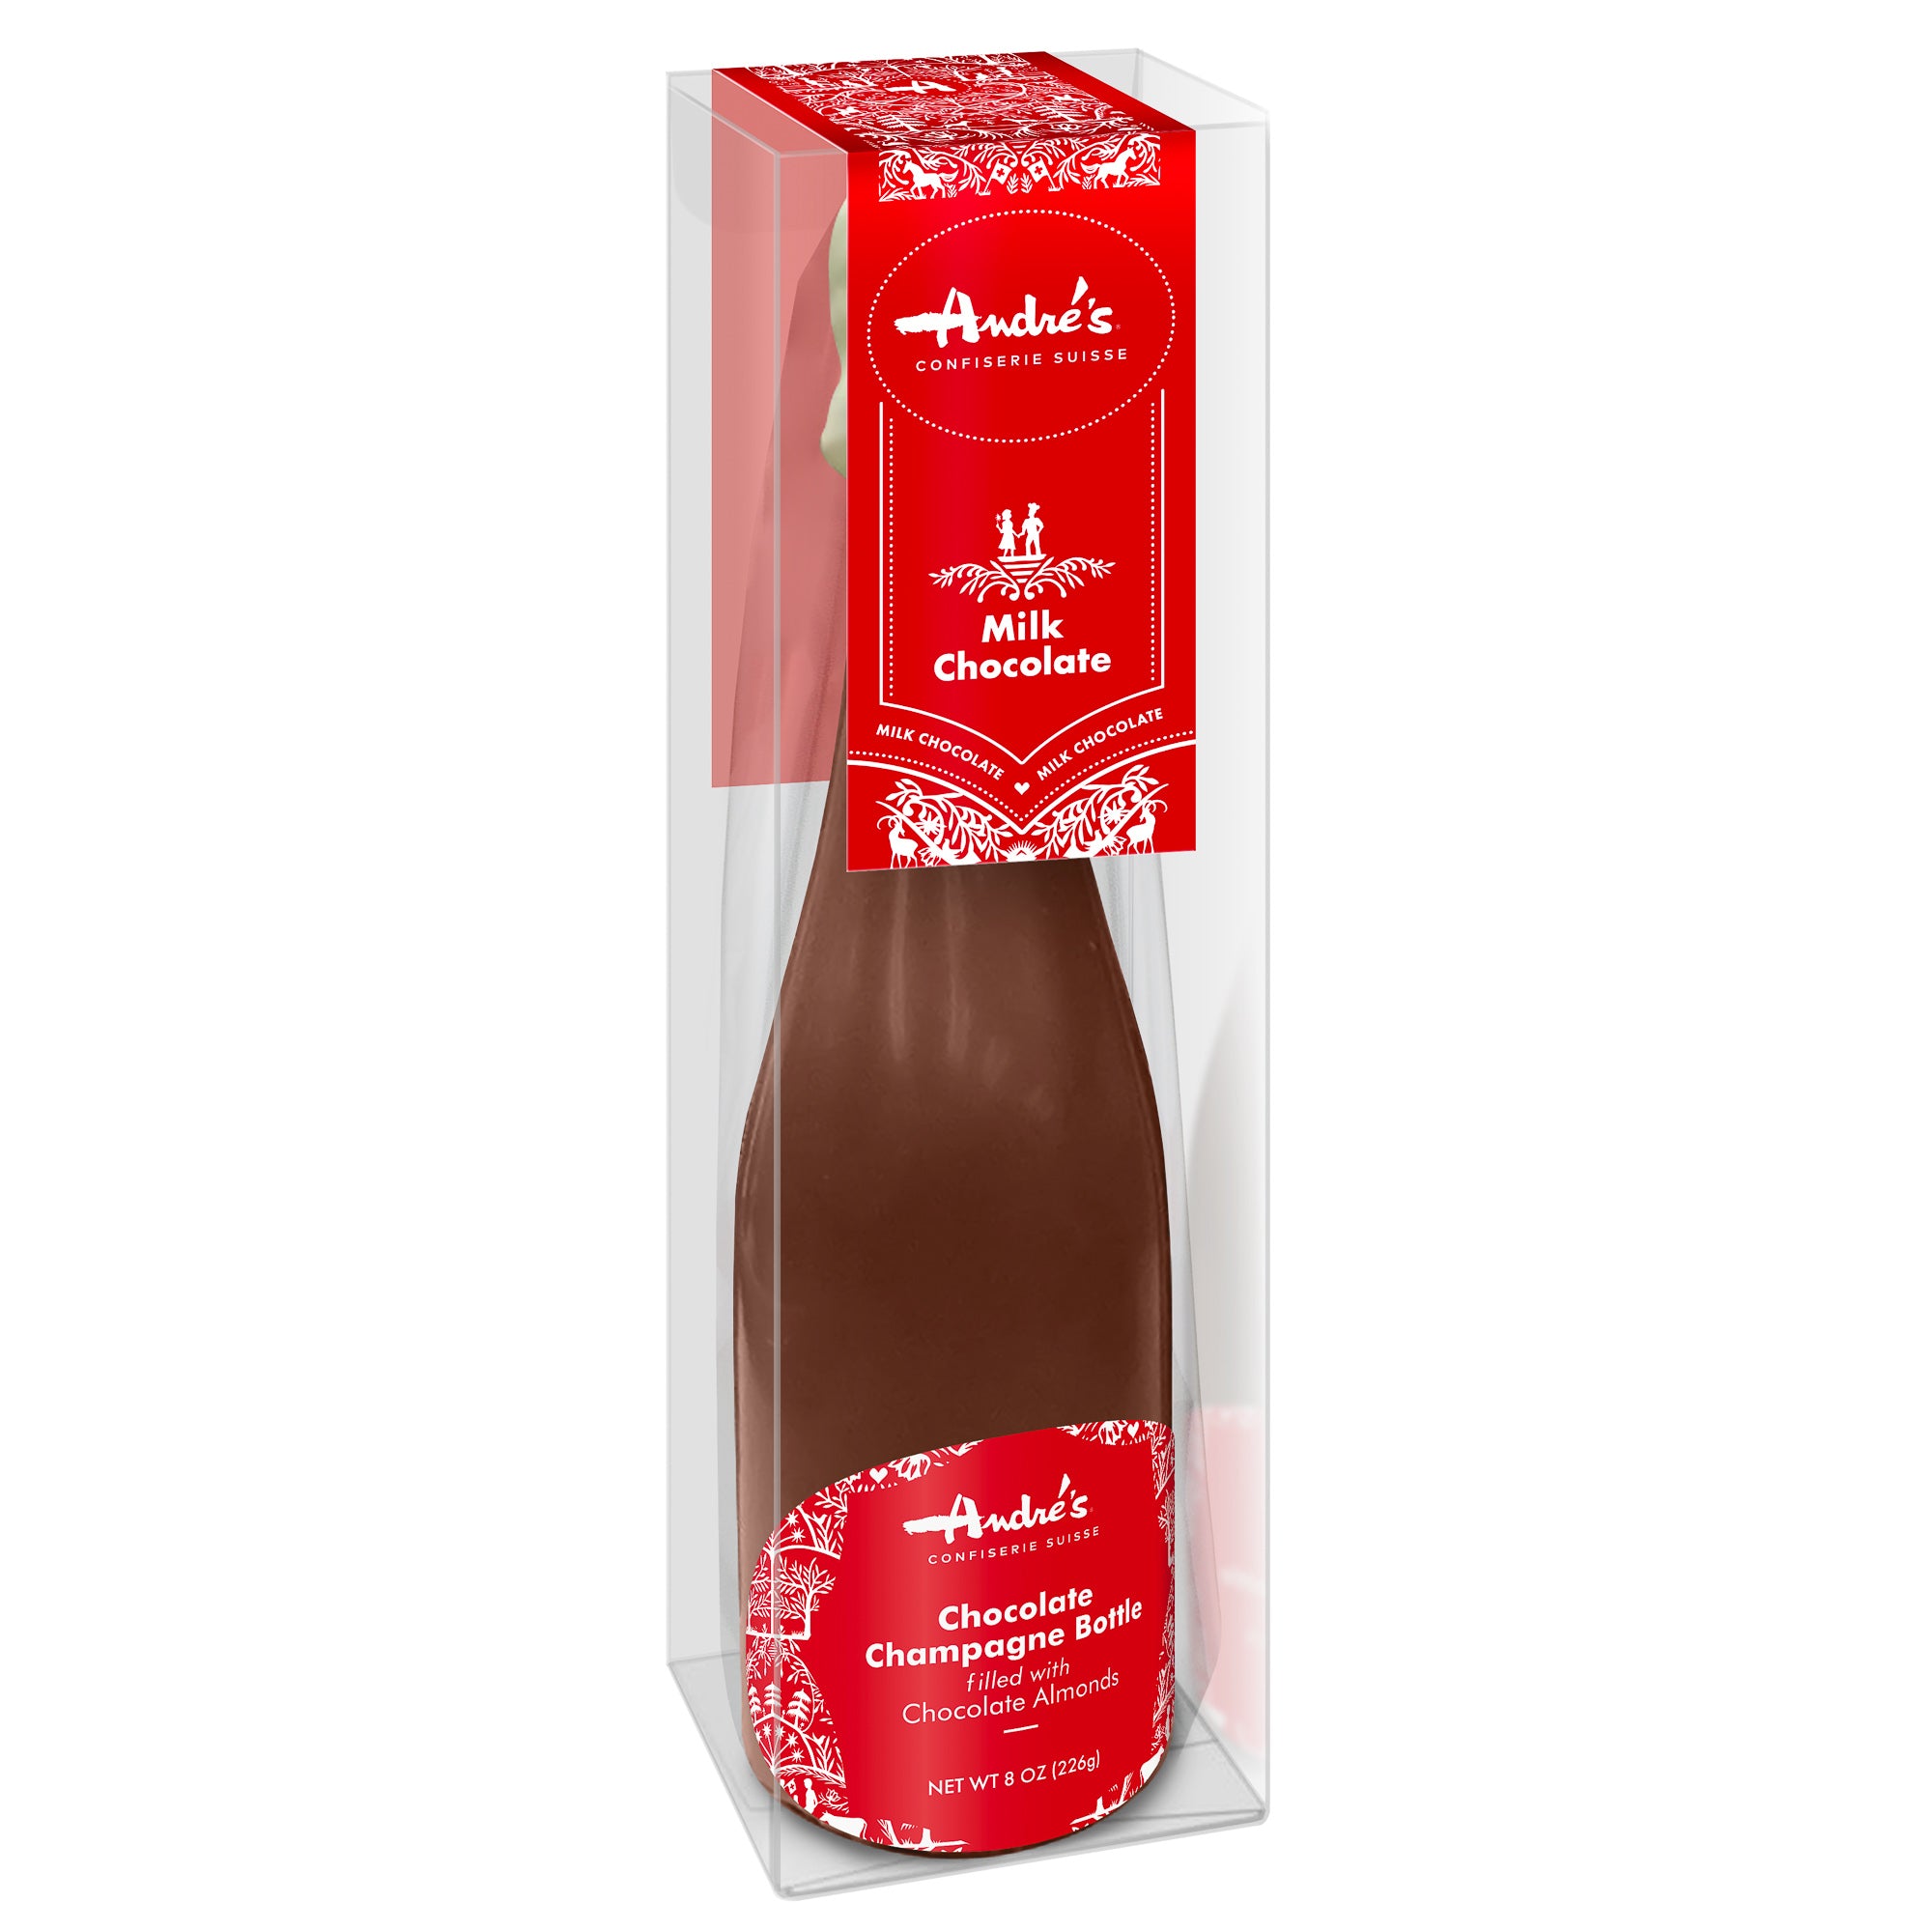 Chocolate Almond-Filled Bottle